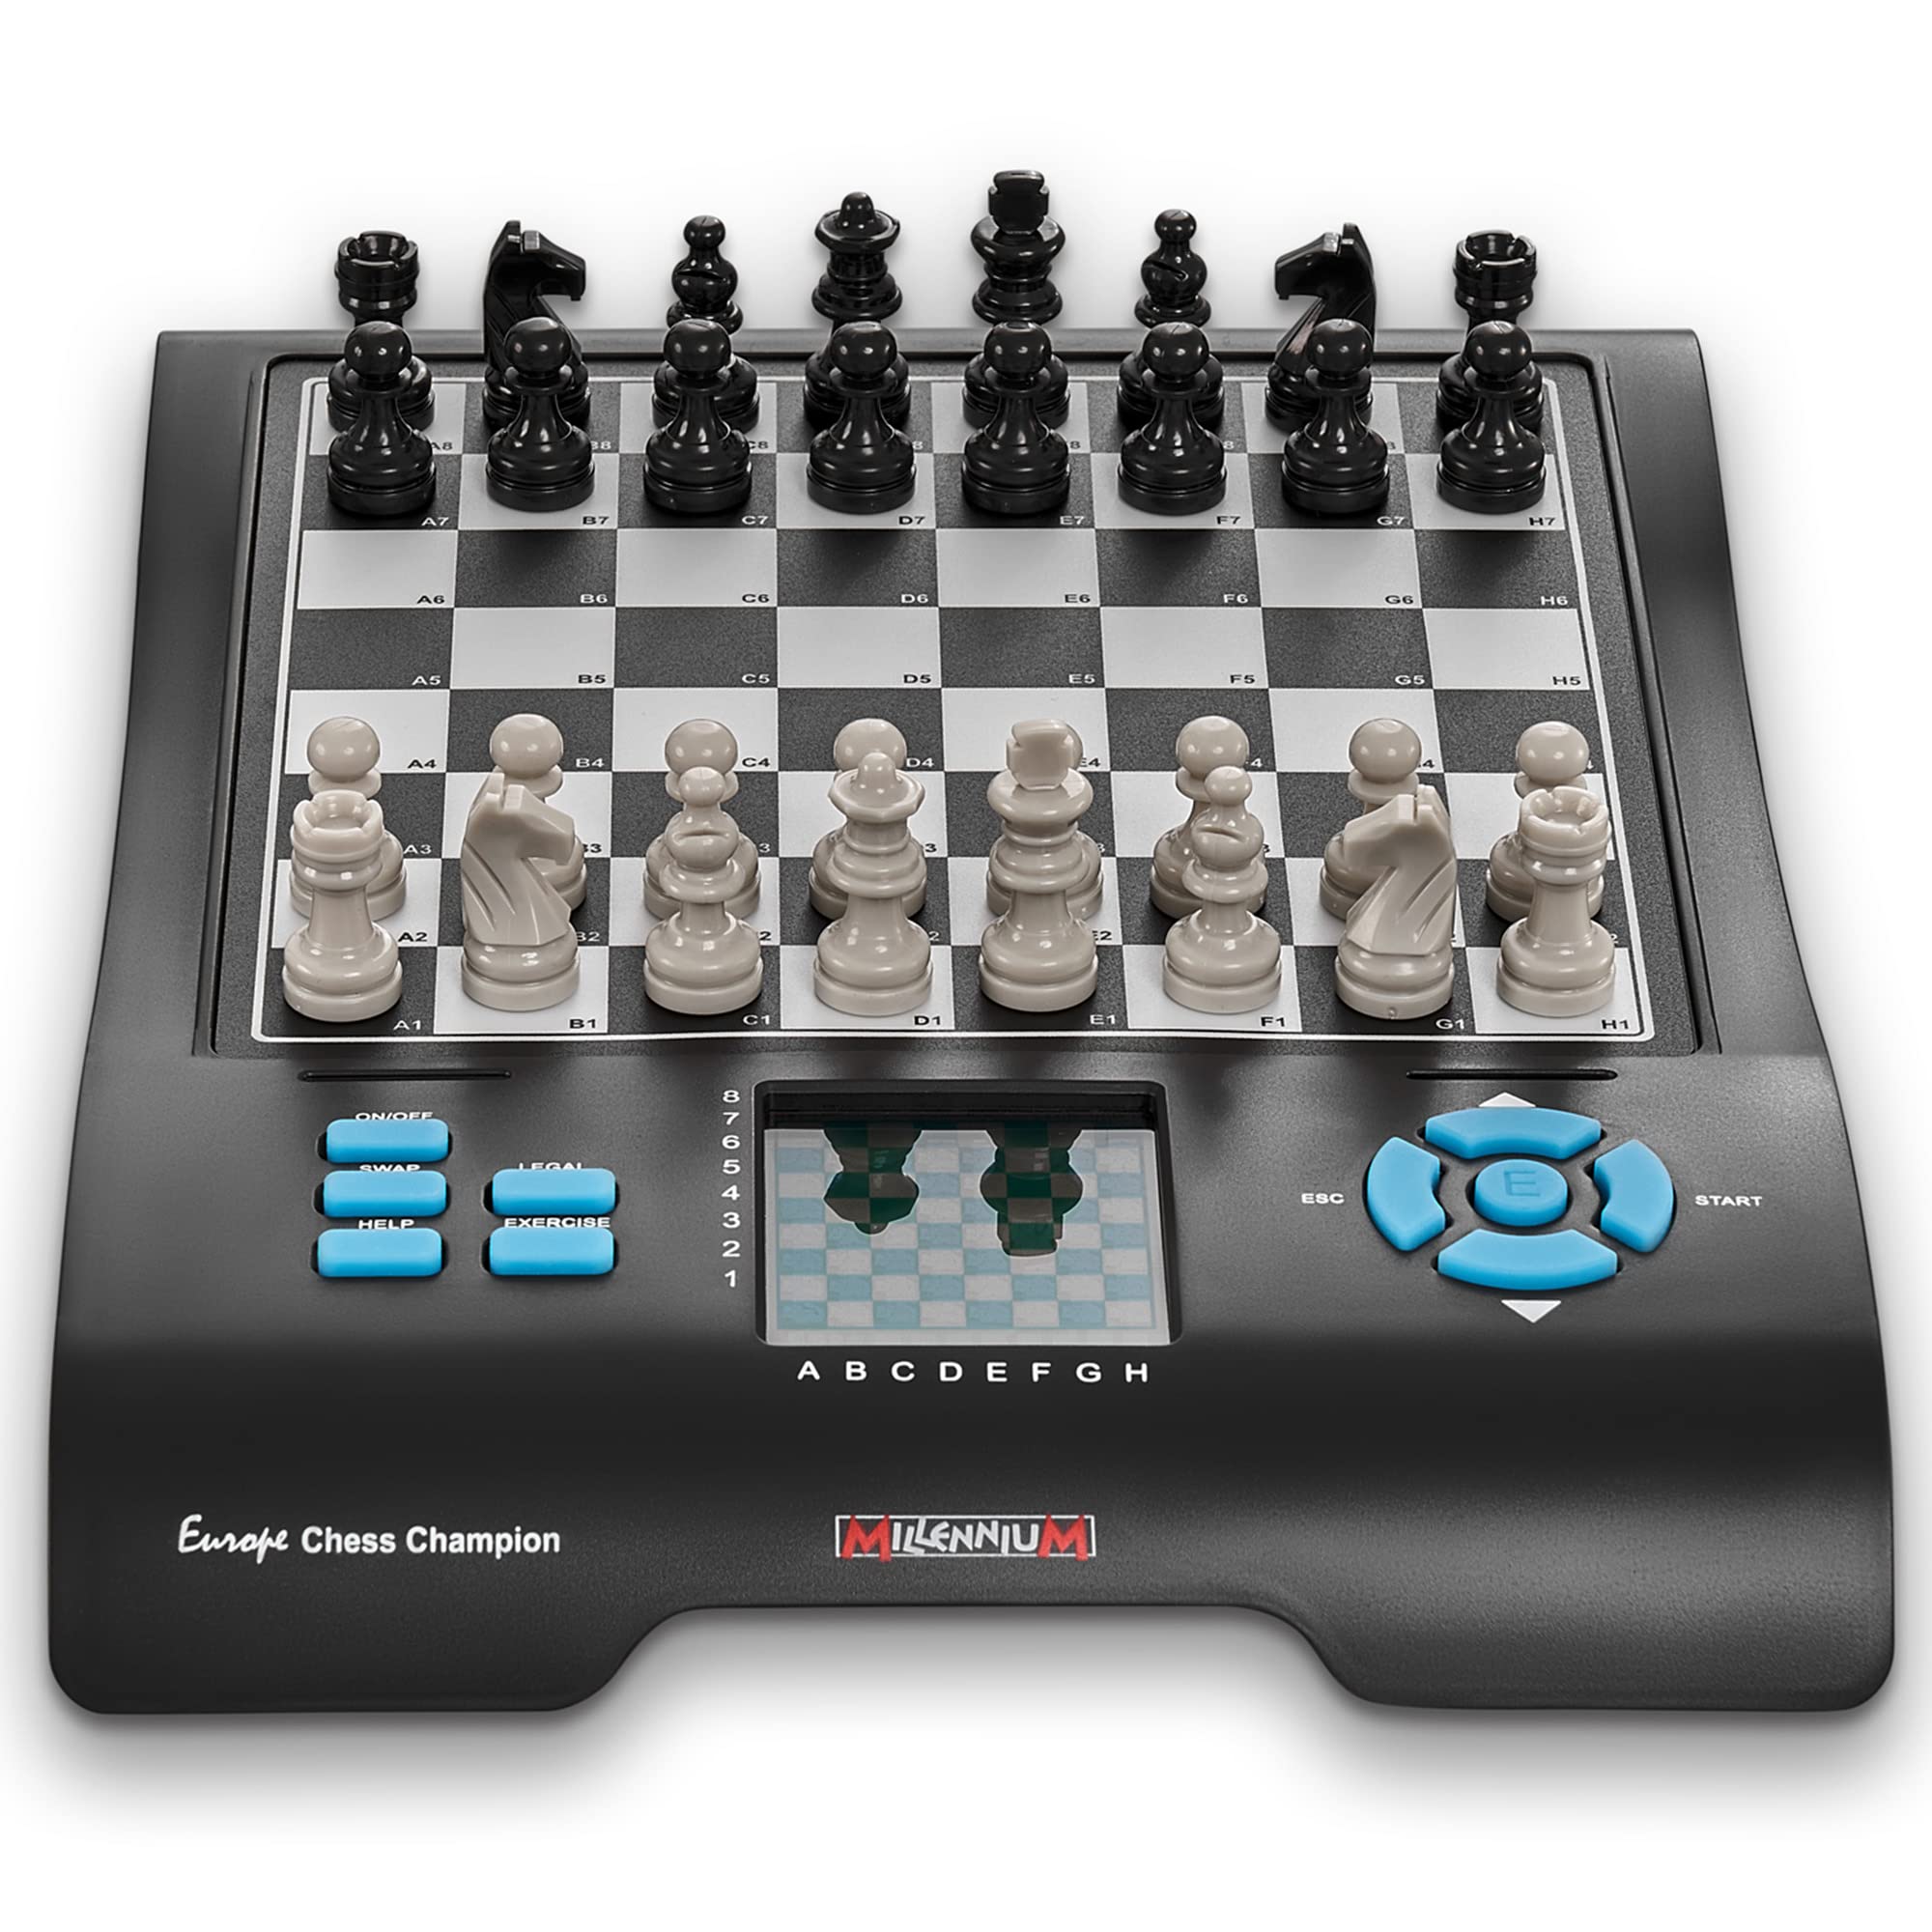 Millennium Chess Champion Electronic Chess Board - for Beginners & Improving Players - Great Partner for Play and Practice- LED Display – Built-in Chess Engines - Interactive - MIL800